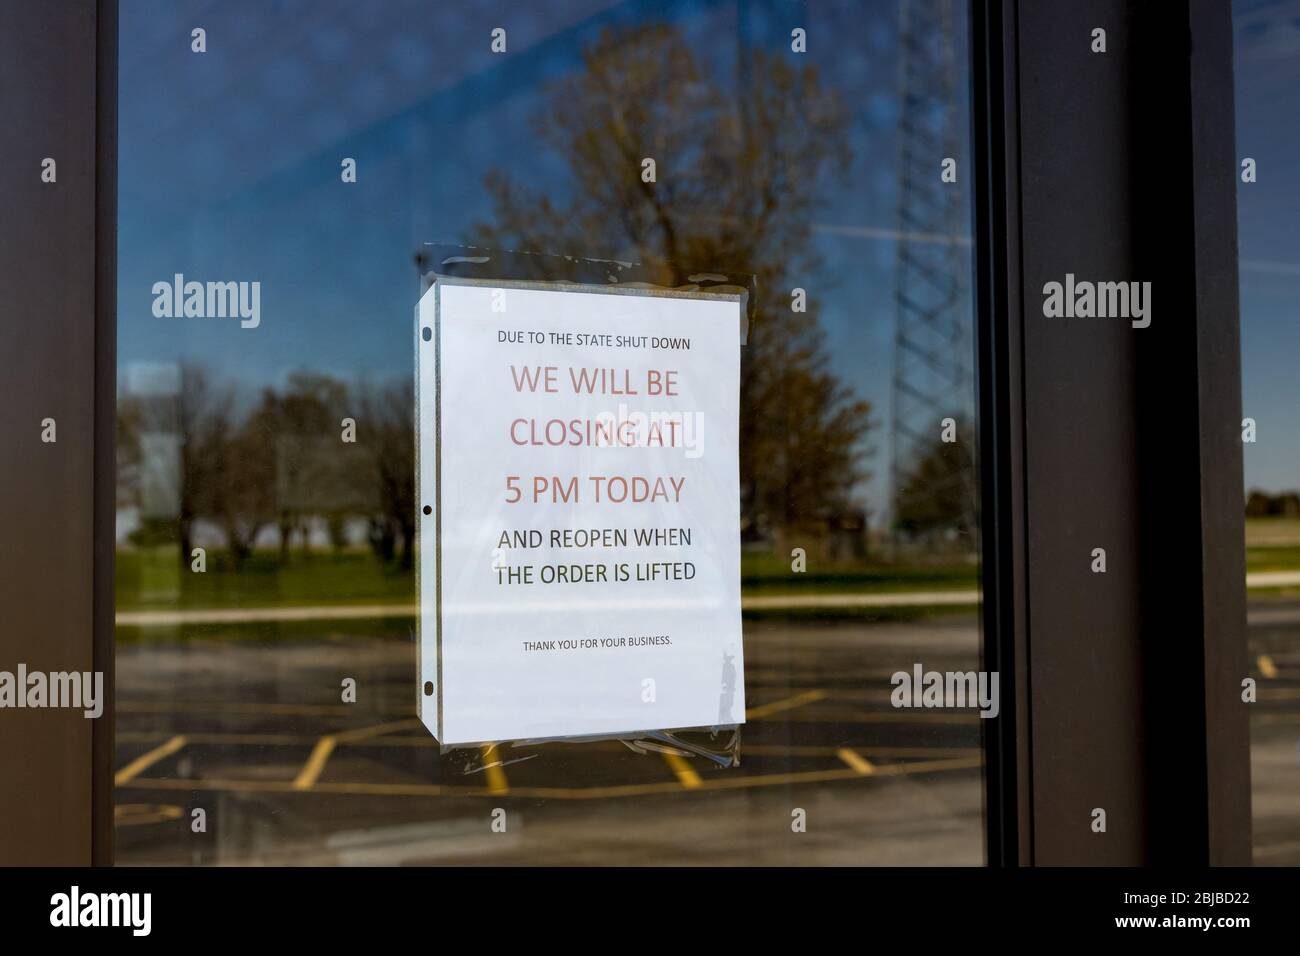 Business closed sign due to stay at home order in Illinois during Covid-19 coronavirus pandemic Stock Photo